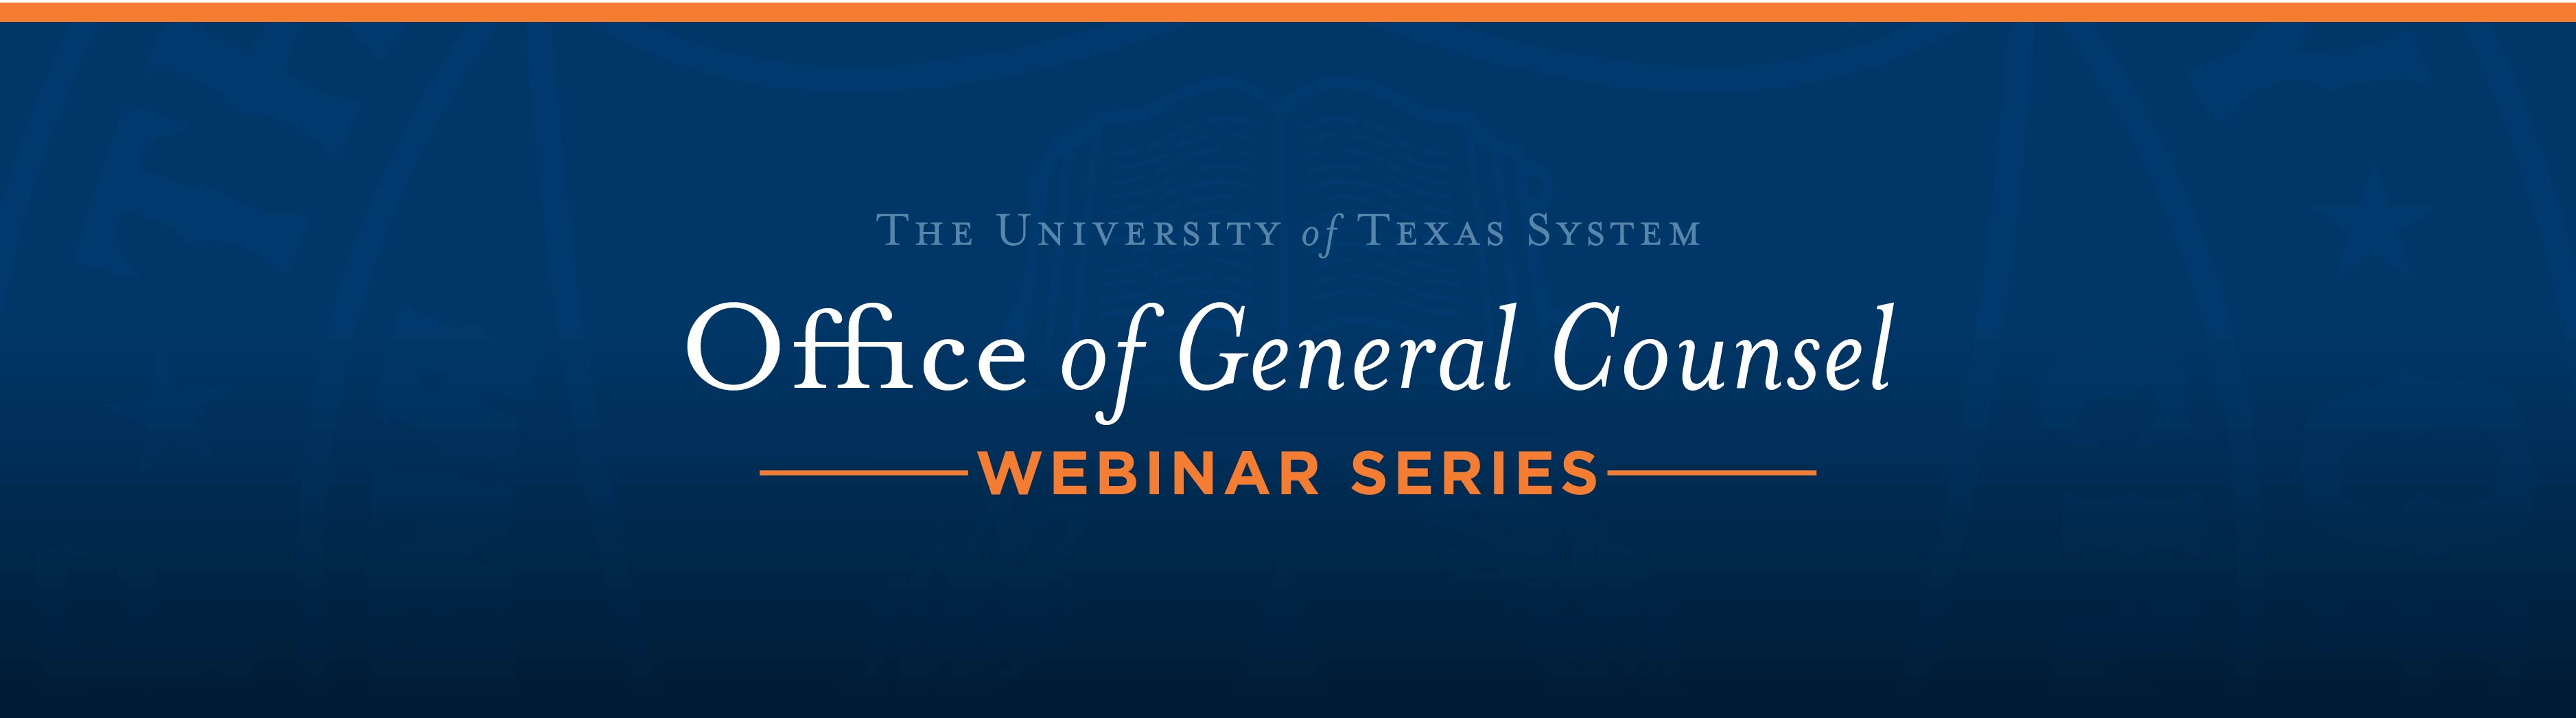 The Office of General Counsel Webinar Series